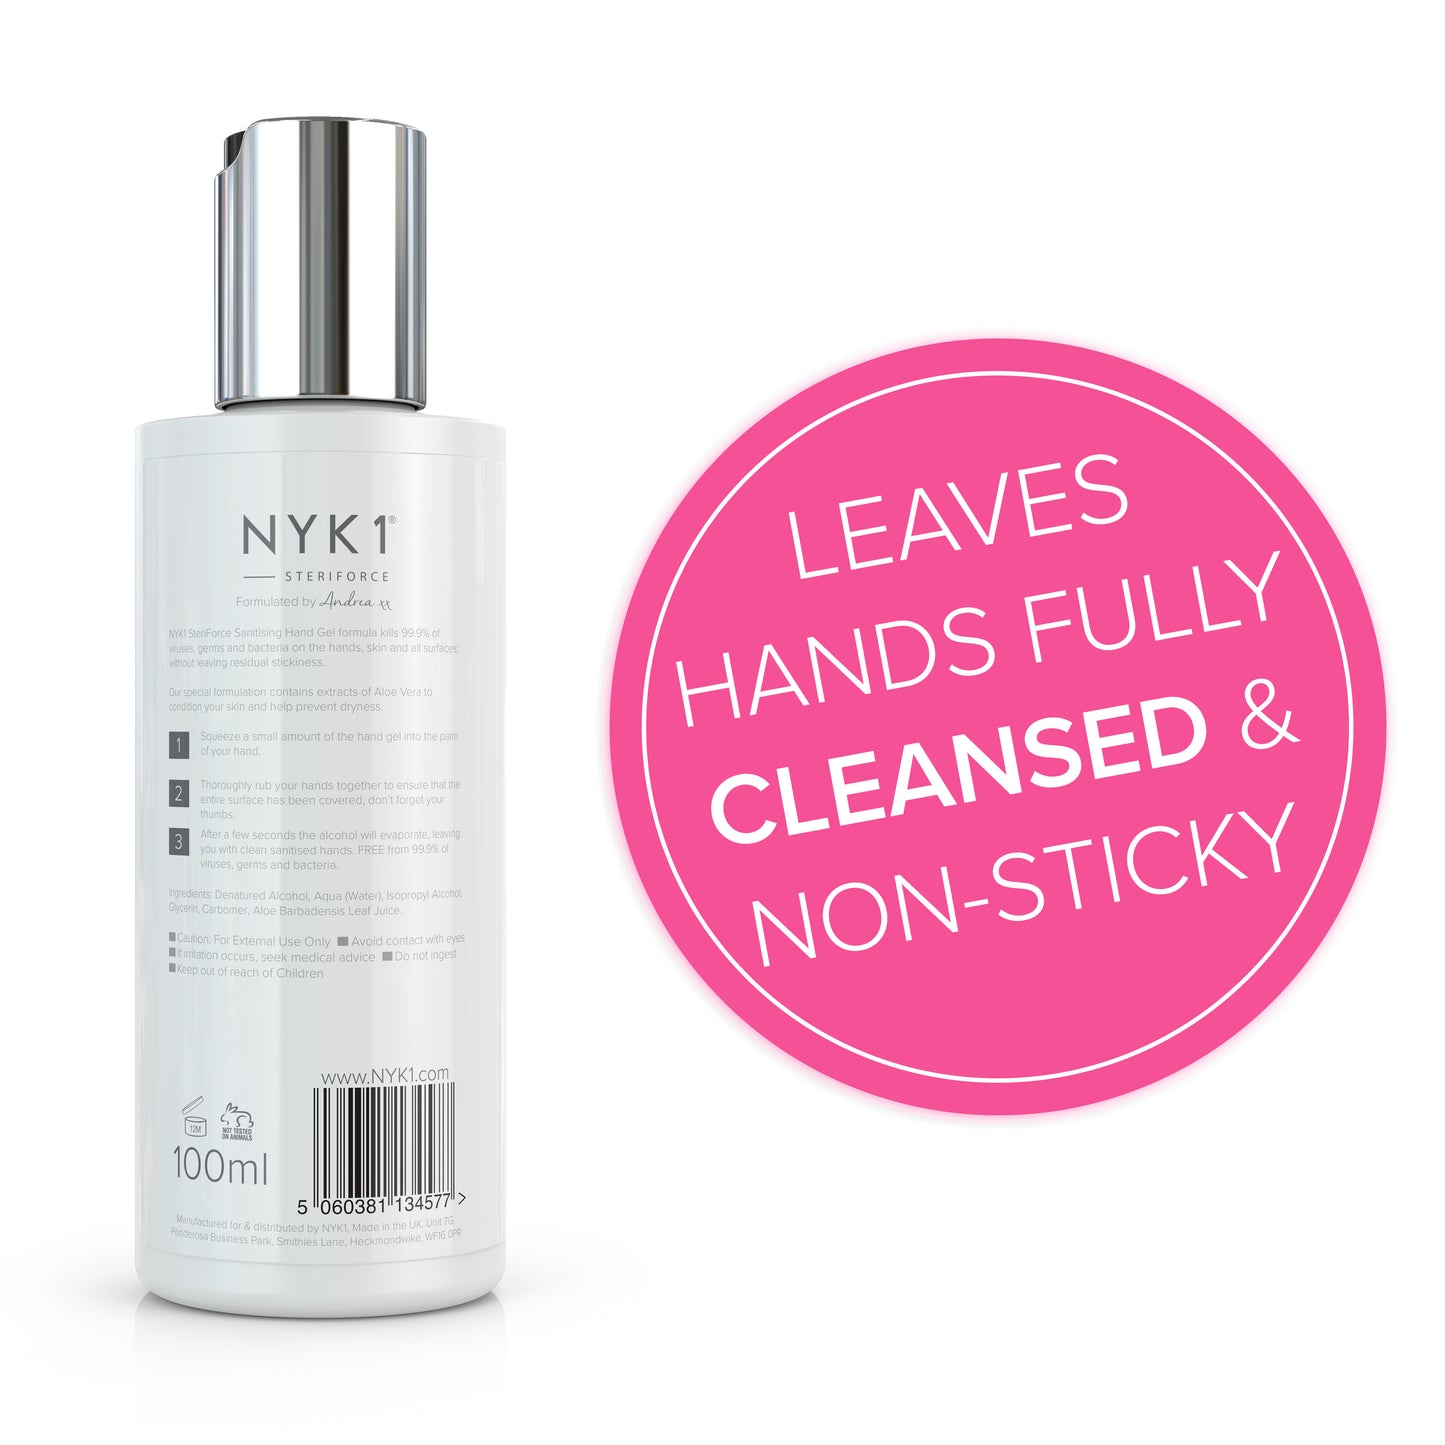 Leaves hands fully cleansed & non-sticky